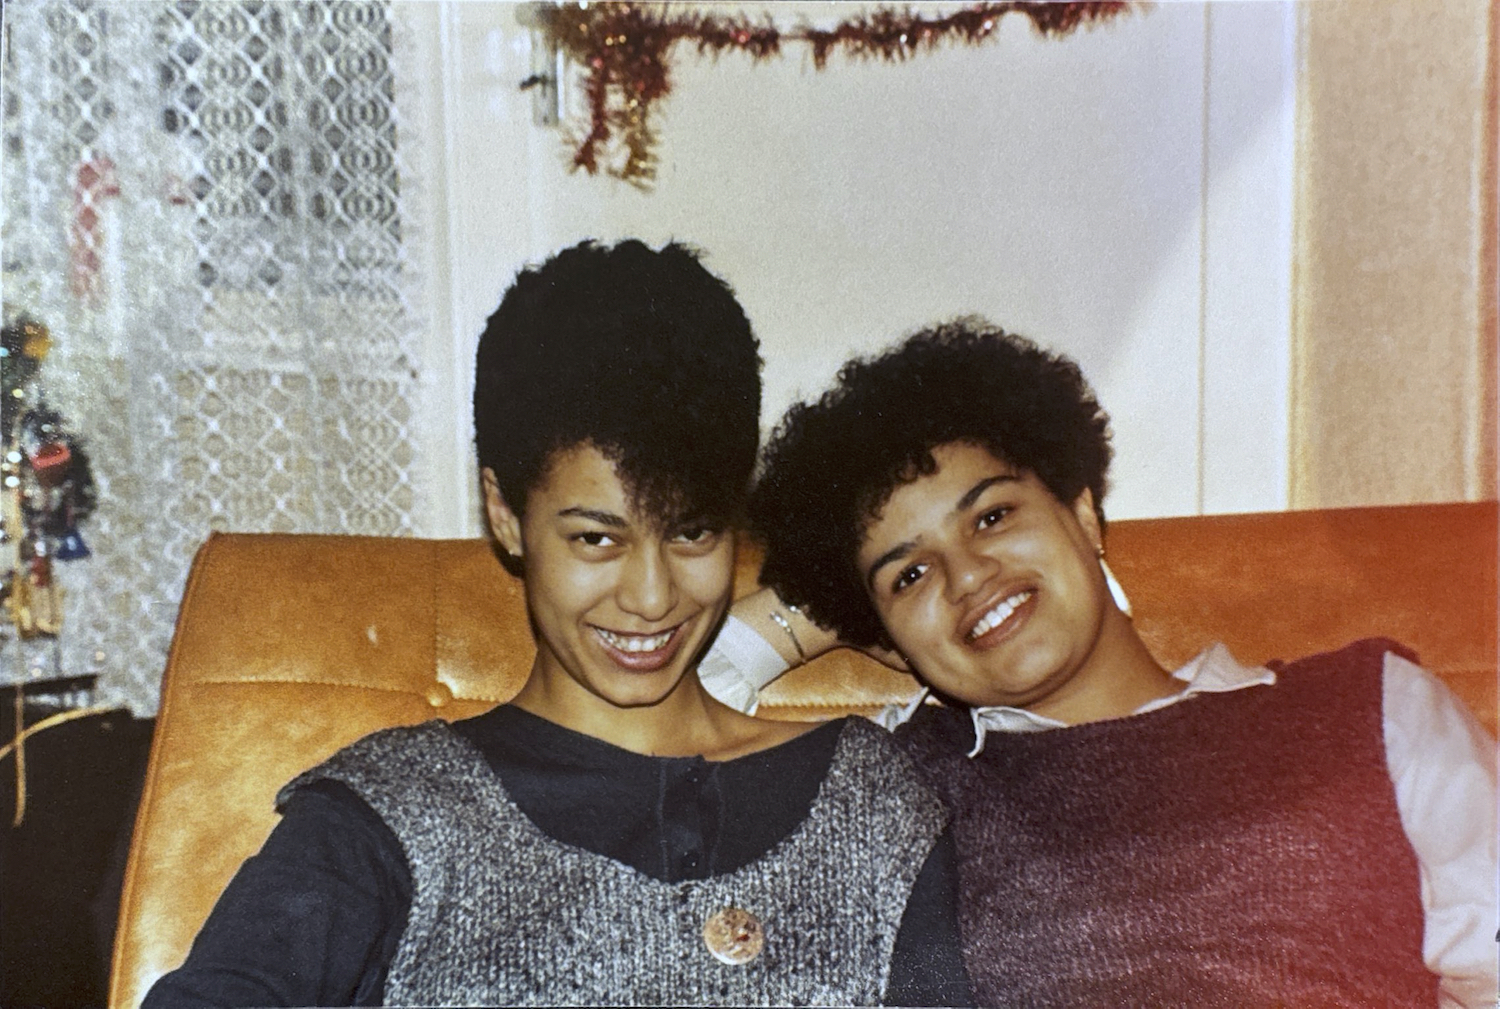 Maud Sulter and Jackie Kay sit next to each other on a sofa, probably in their early 20s, smiling. Jackie's arm is resting behind her and Maud and there is tinsel hanging behind them.